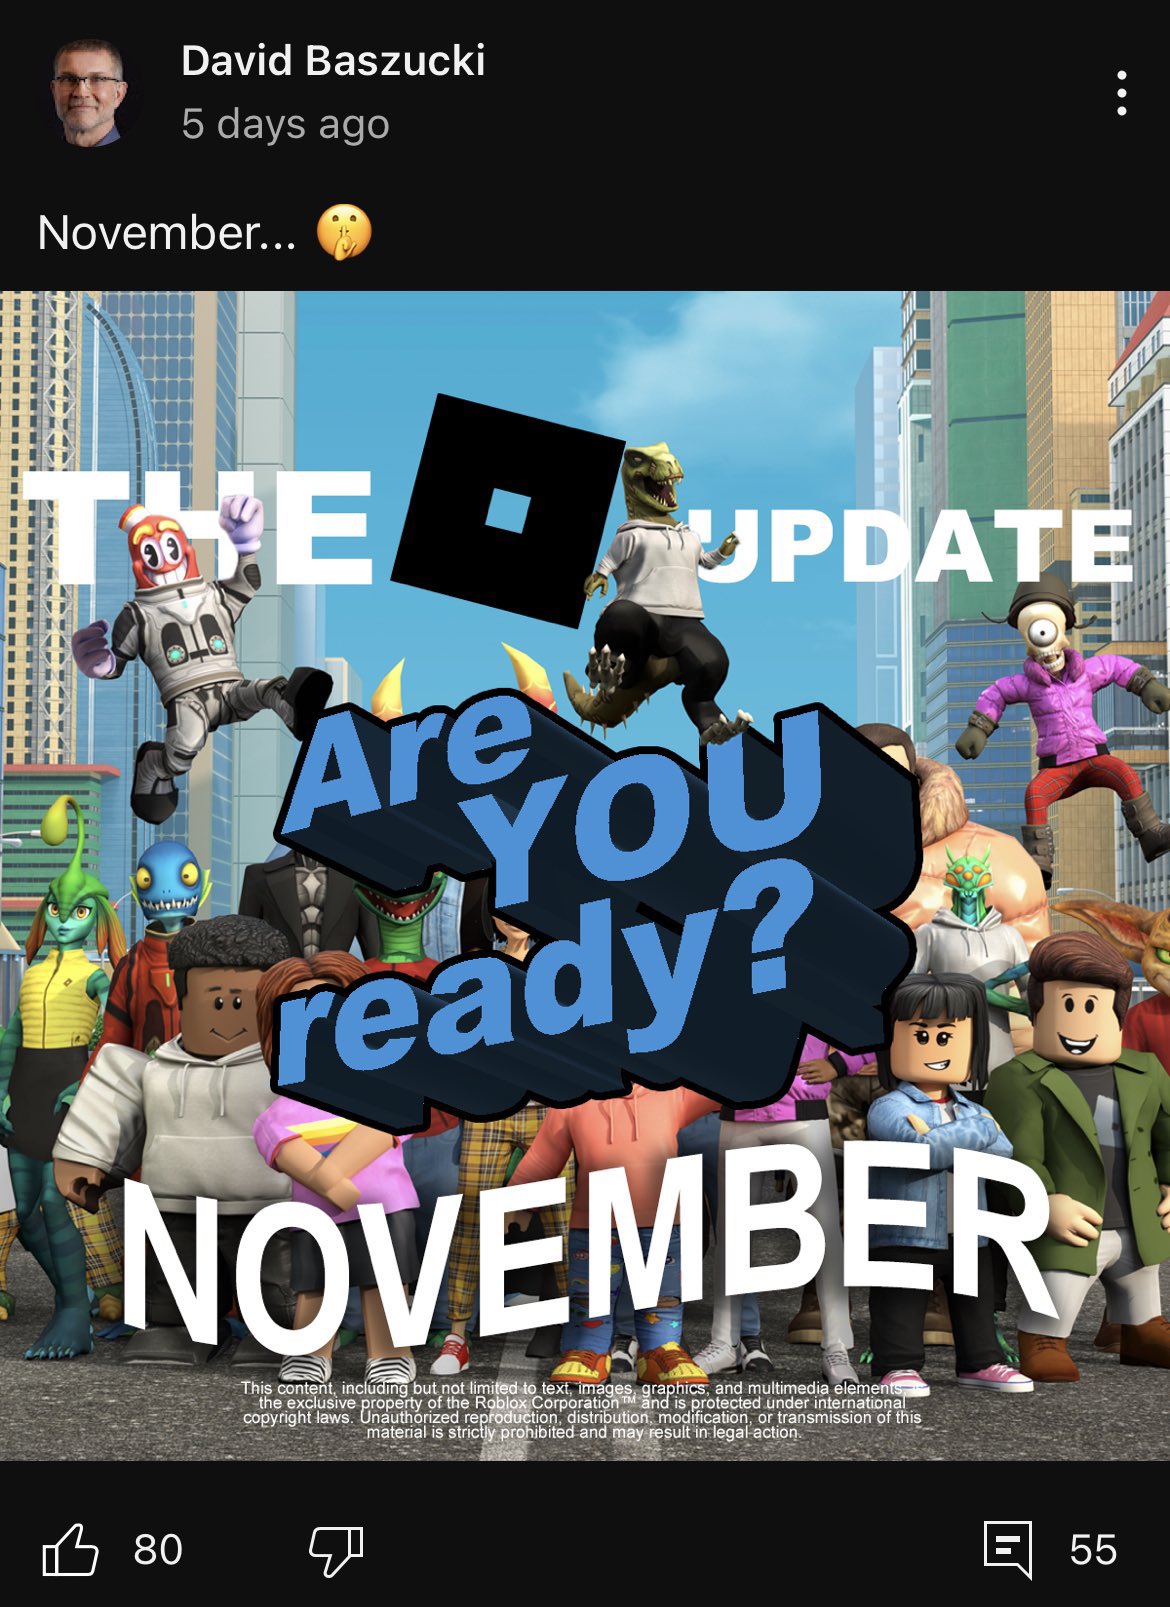 Roblox News (Parody) 🔔 on X: Are we gonna talk about this